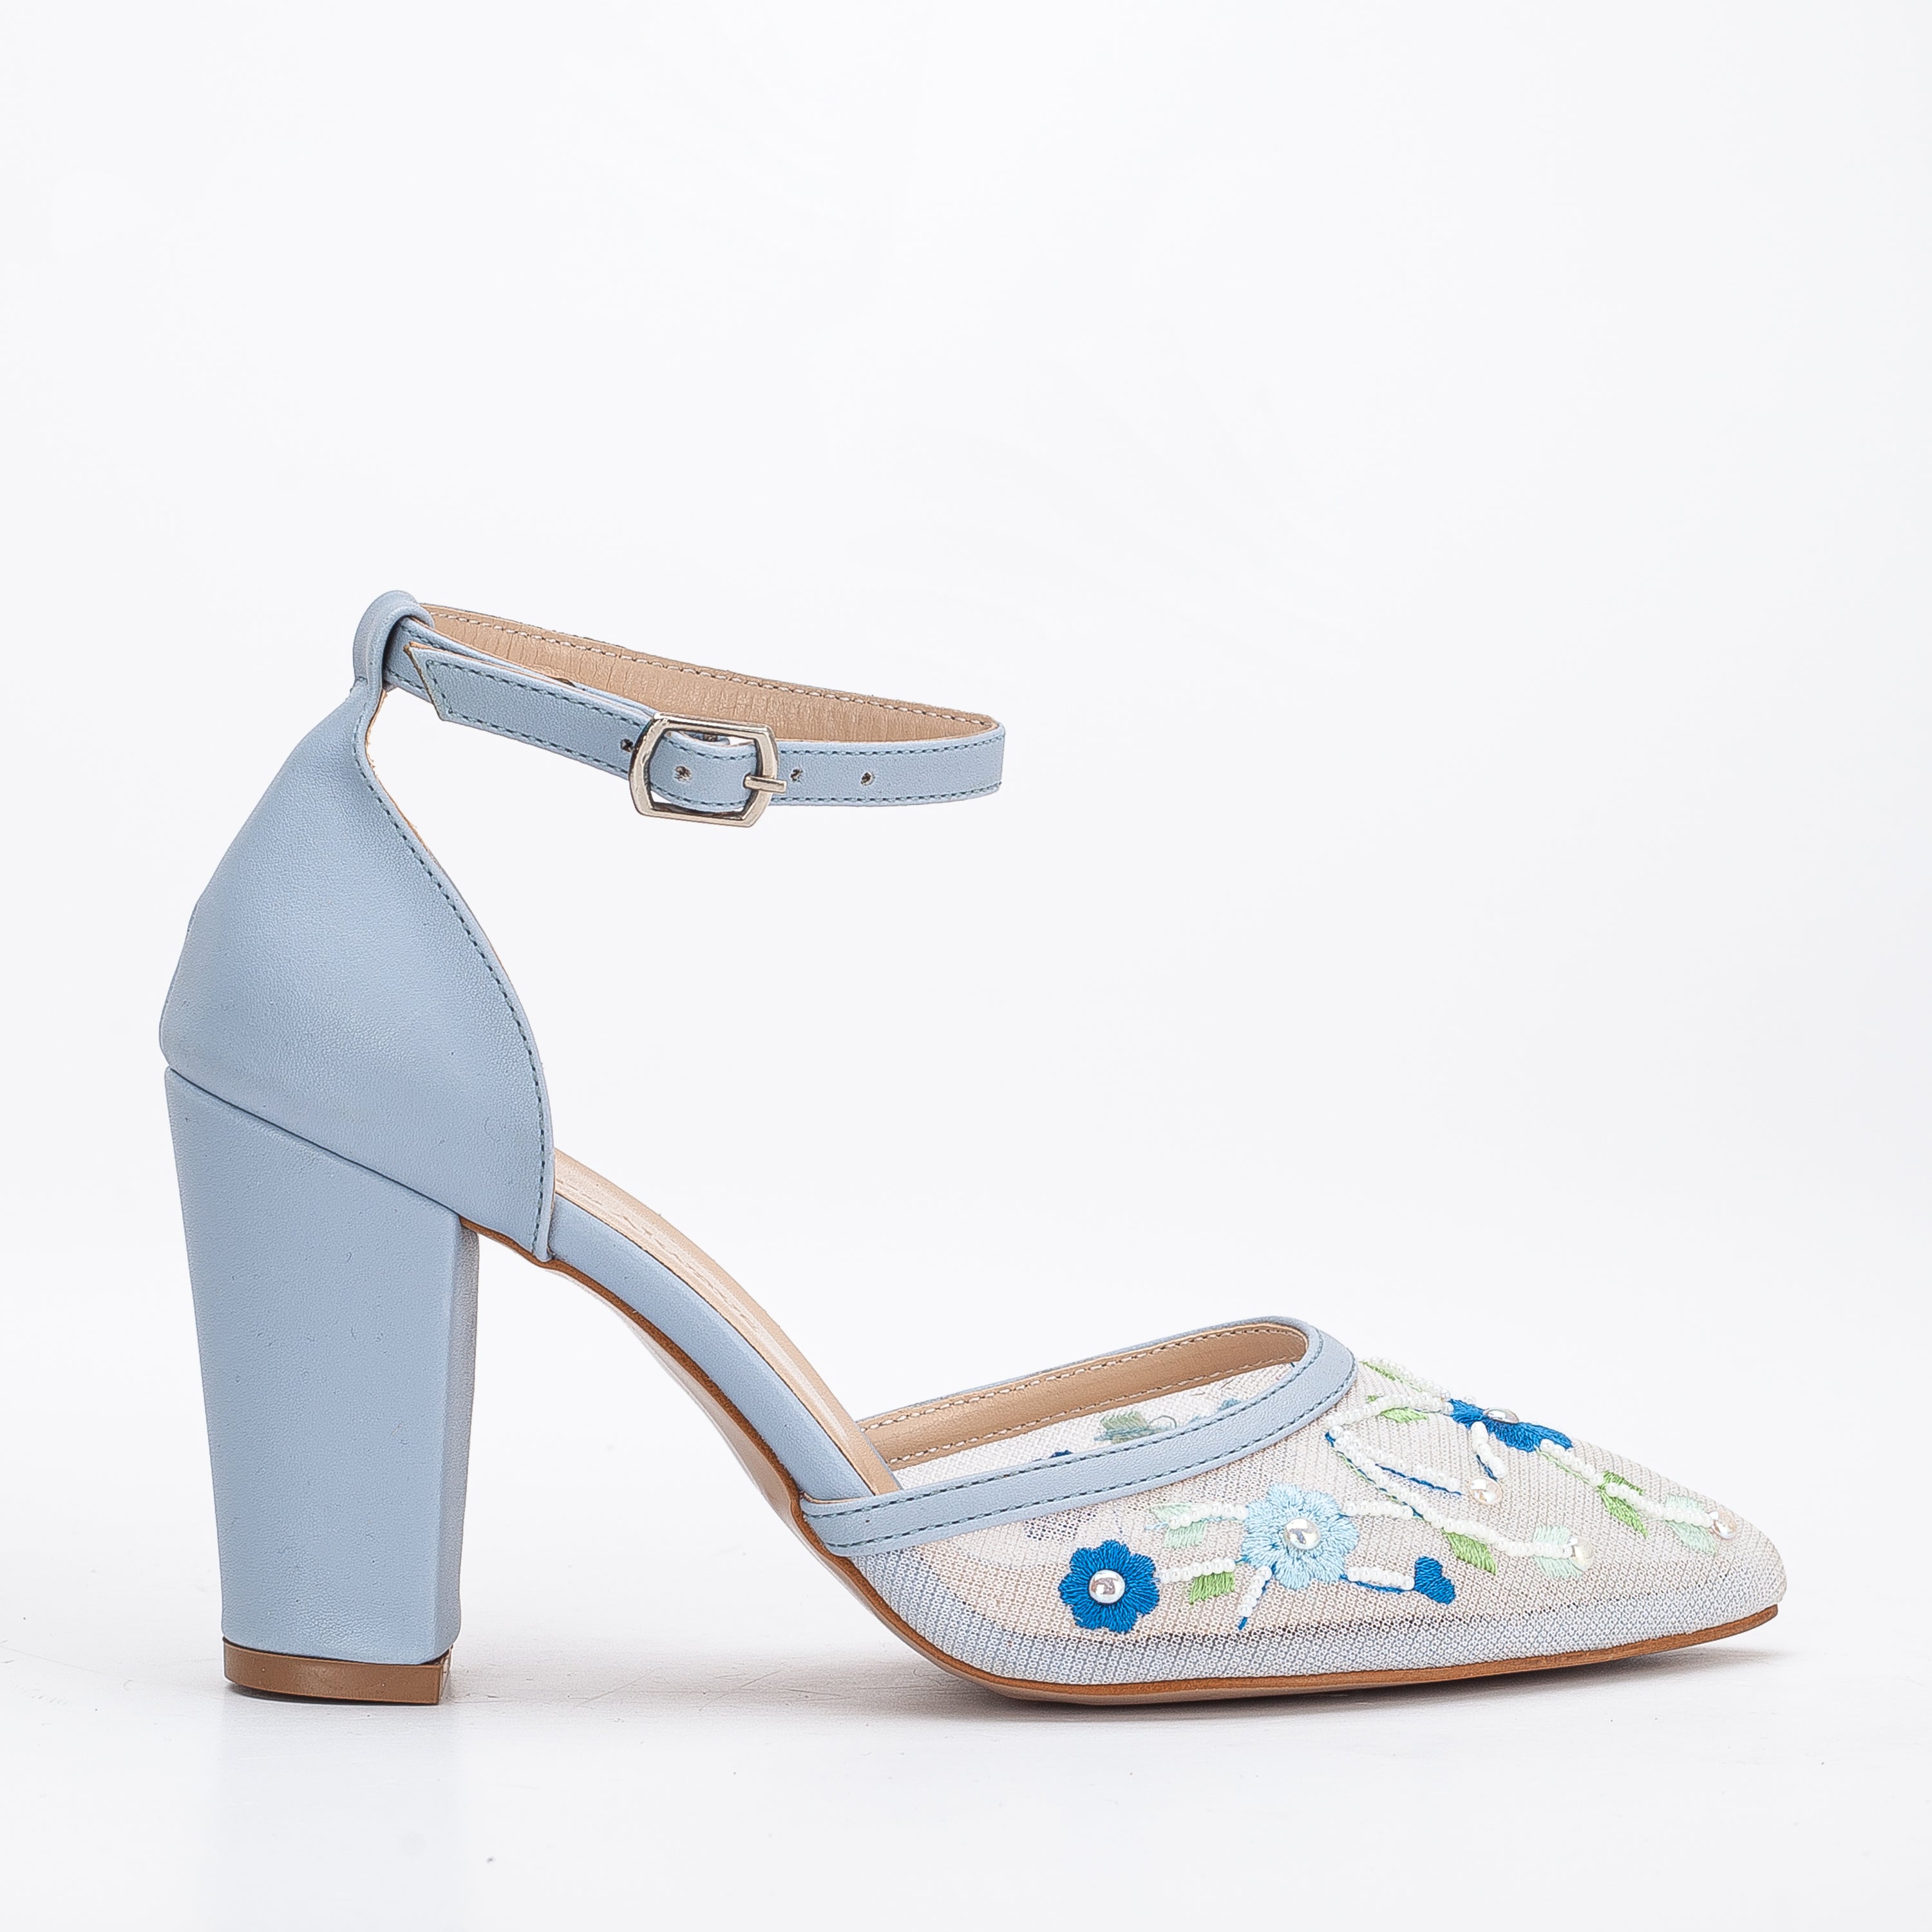 Blue embroidered shoes, Embroidered blue footwear, Blue floral embroidery shoes, Embellished blue shoes, Blue shoes with intricate embroidery, Embroidered blue flats, Blue pumps with embroidery, Blue high heels with delicate embroidery, Blue embroidered wedding shoes, Blue embroidered bridal shoes.